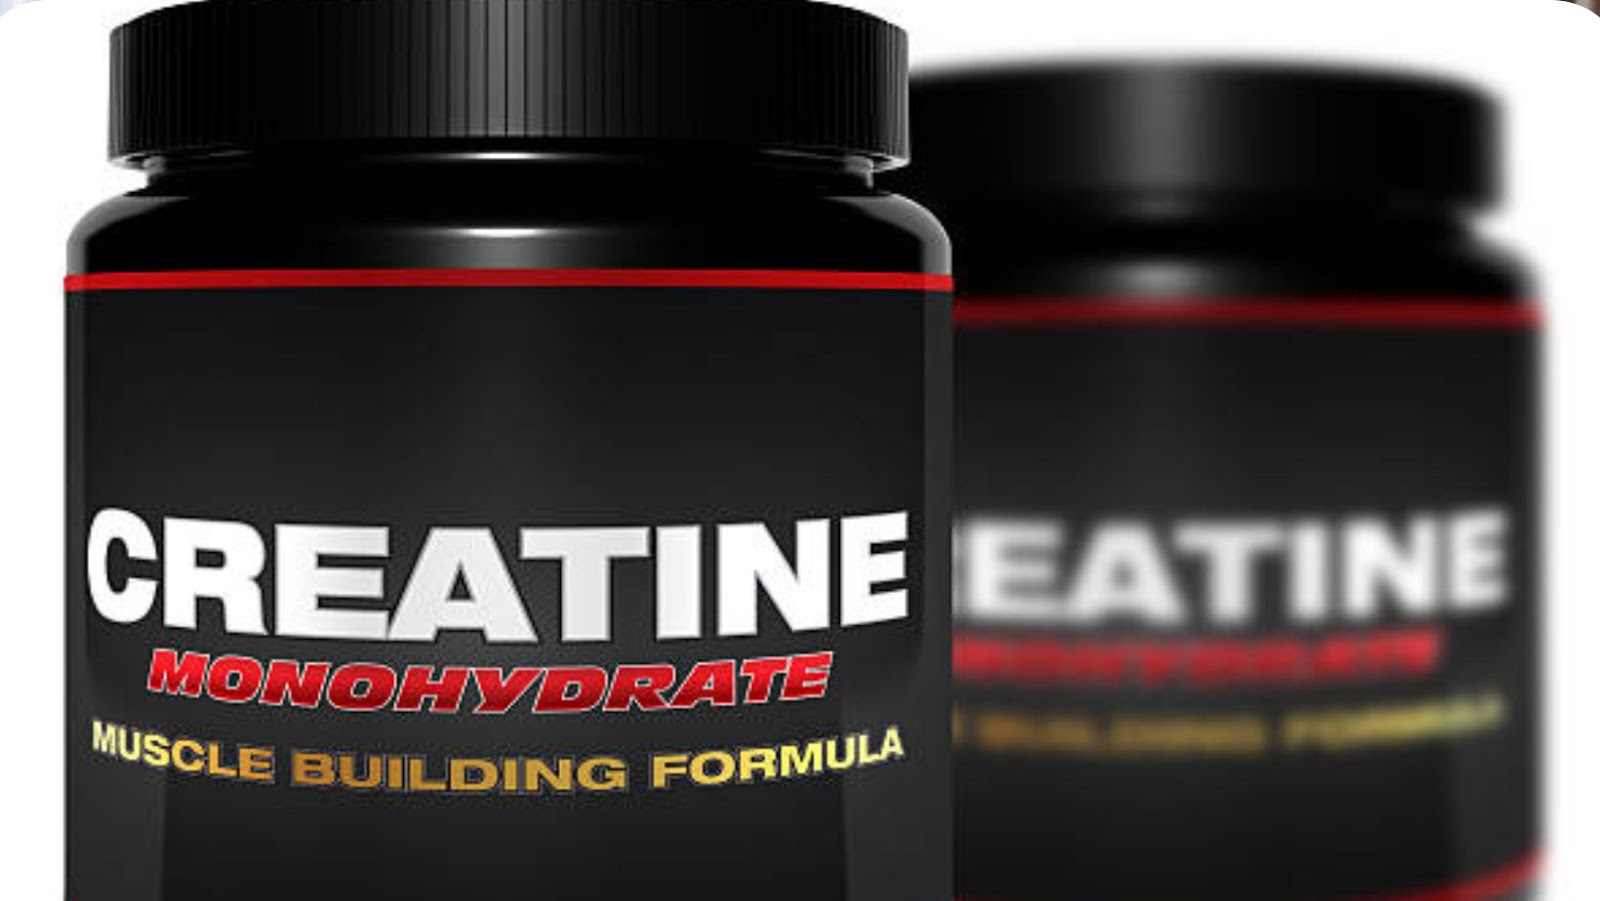 How Expensive Is Creatine?